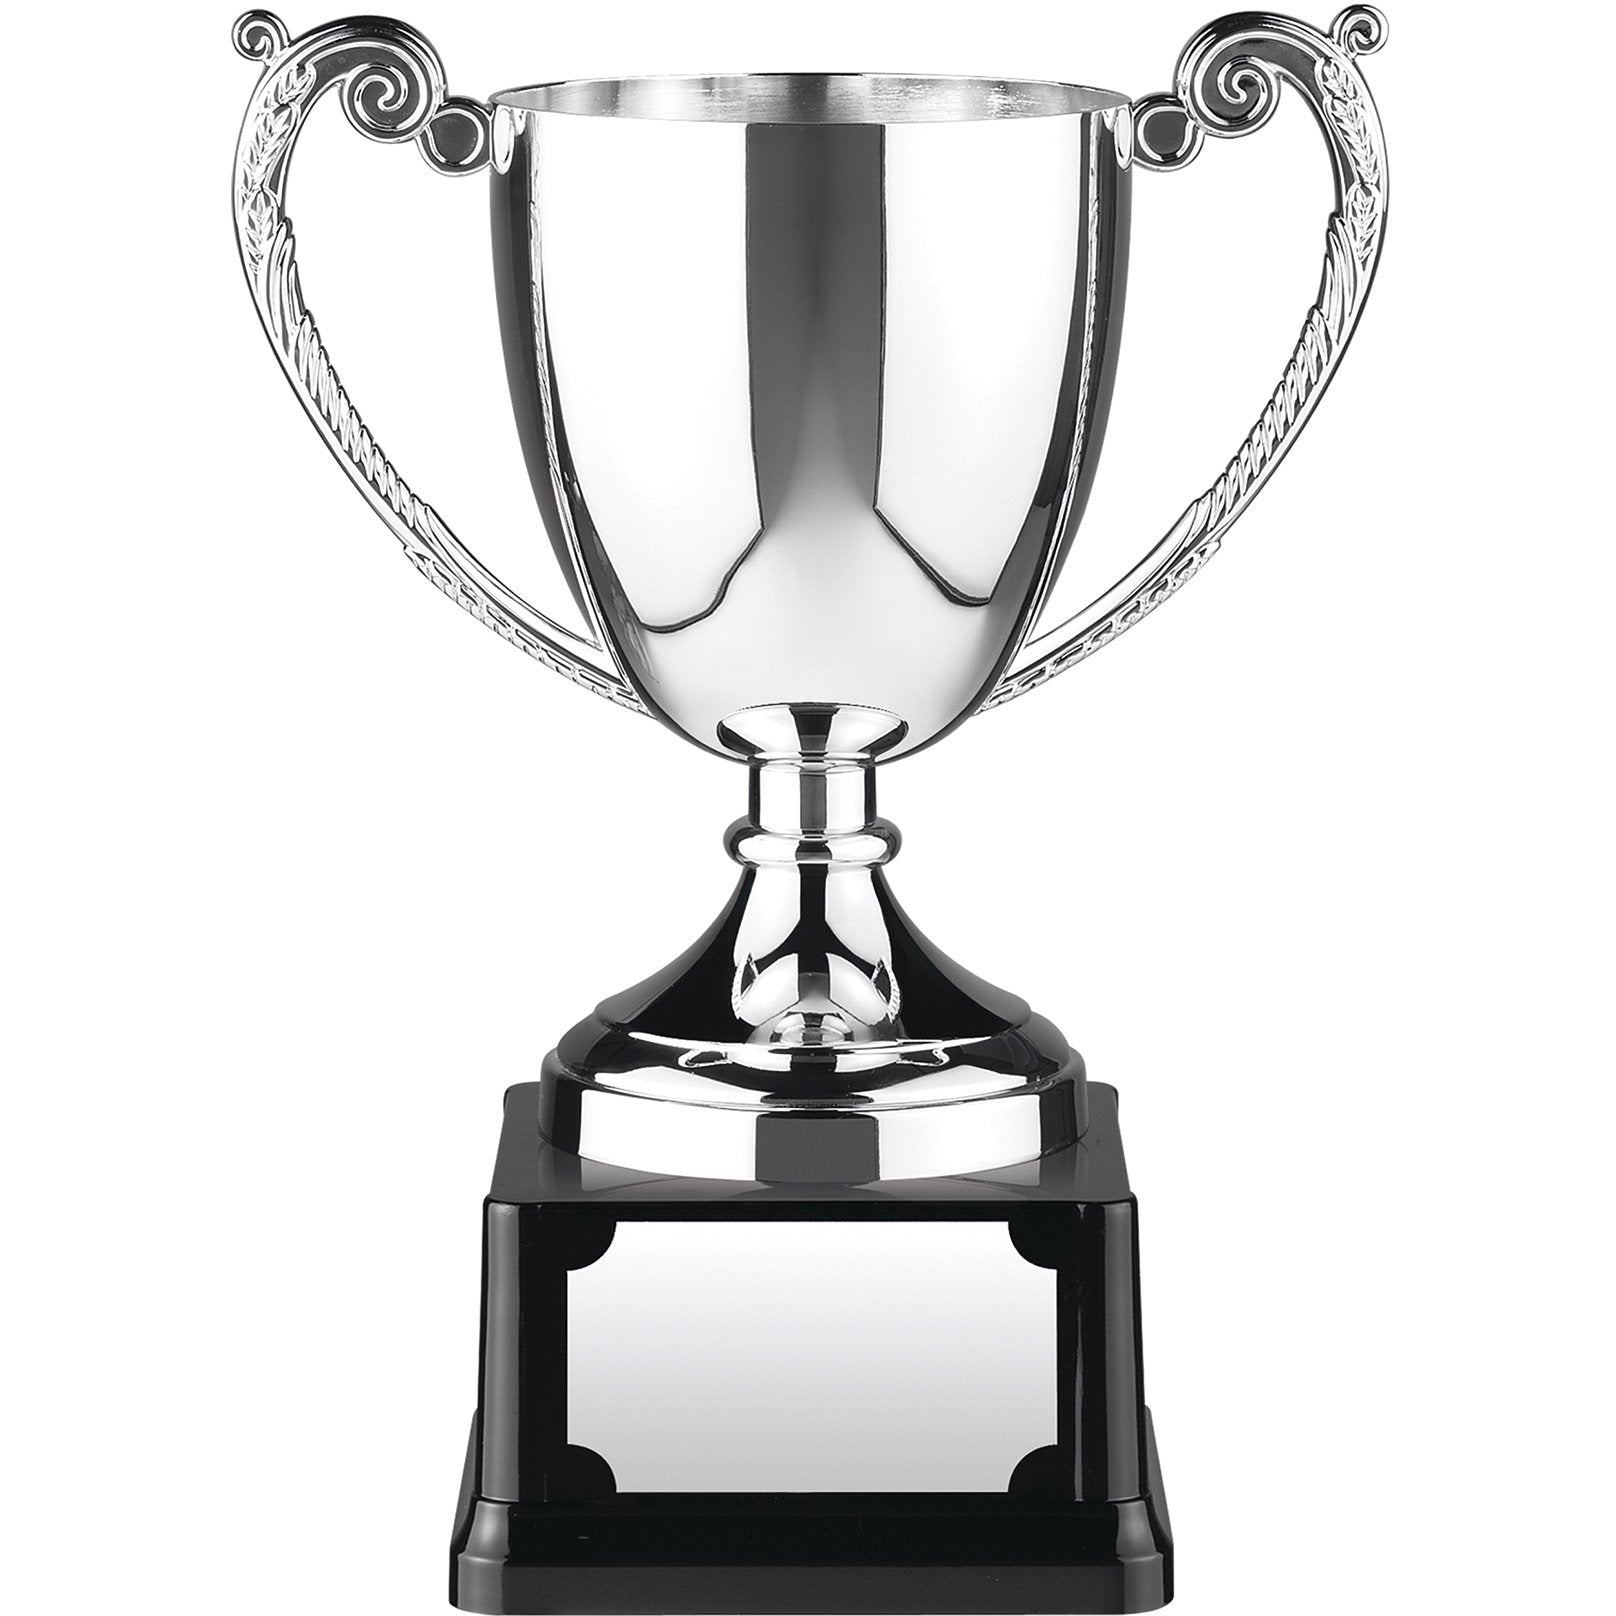 Colonial Endurance Trophy Cup on Black Square Base